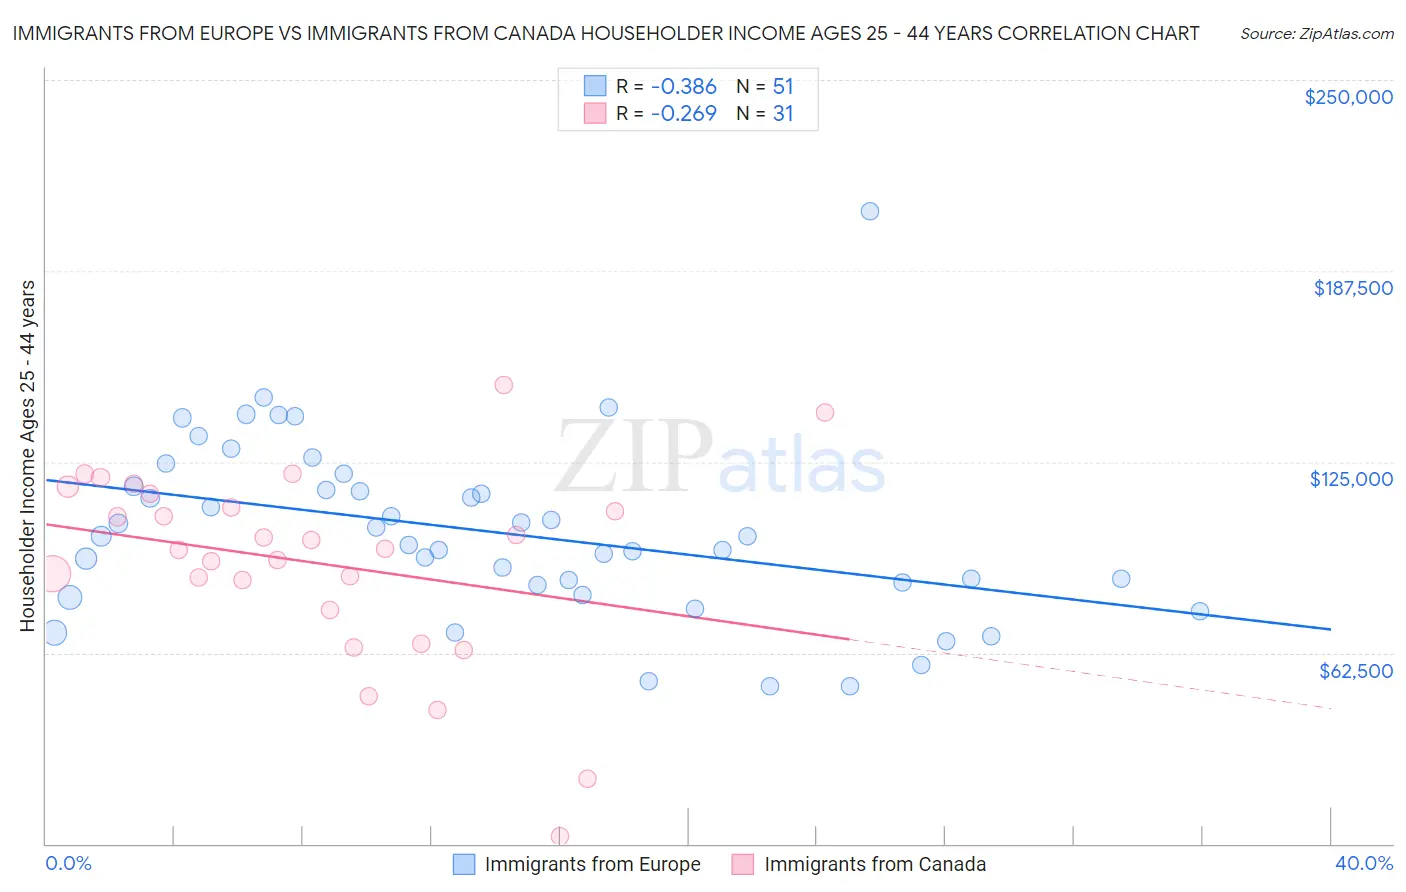 Immigrants from Europe vs Immigrants from Canada Householder Income Ages 25 - 44 years